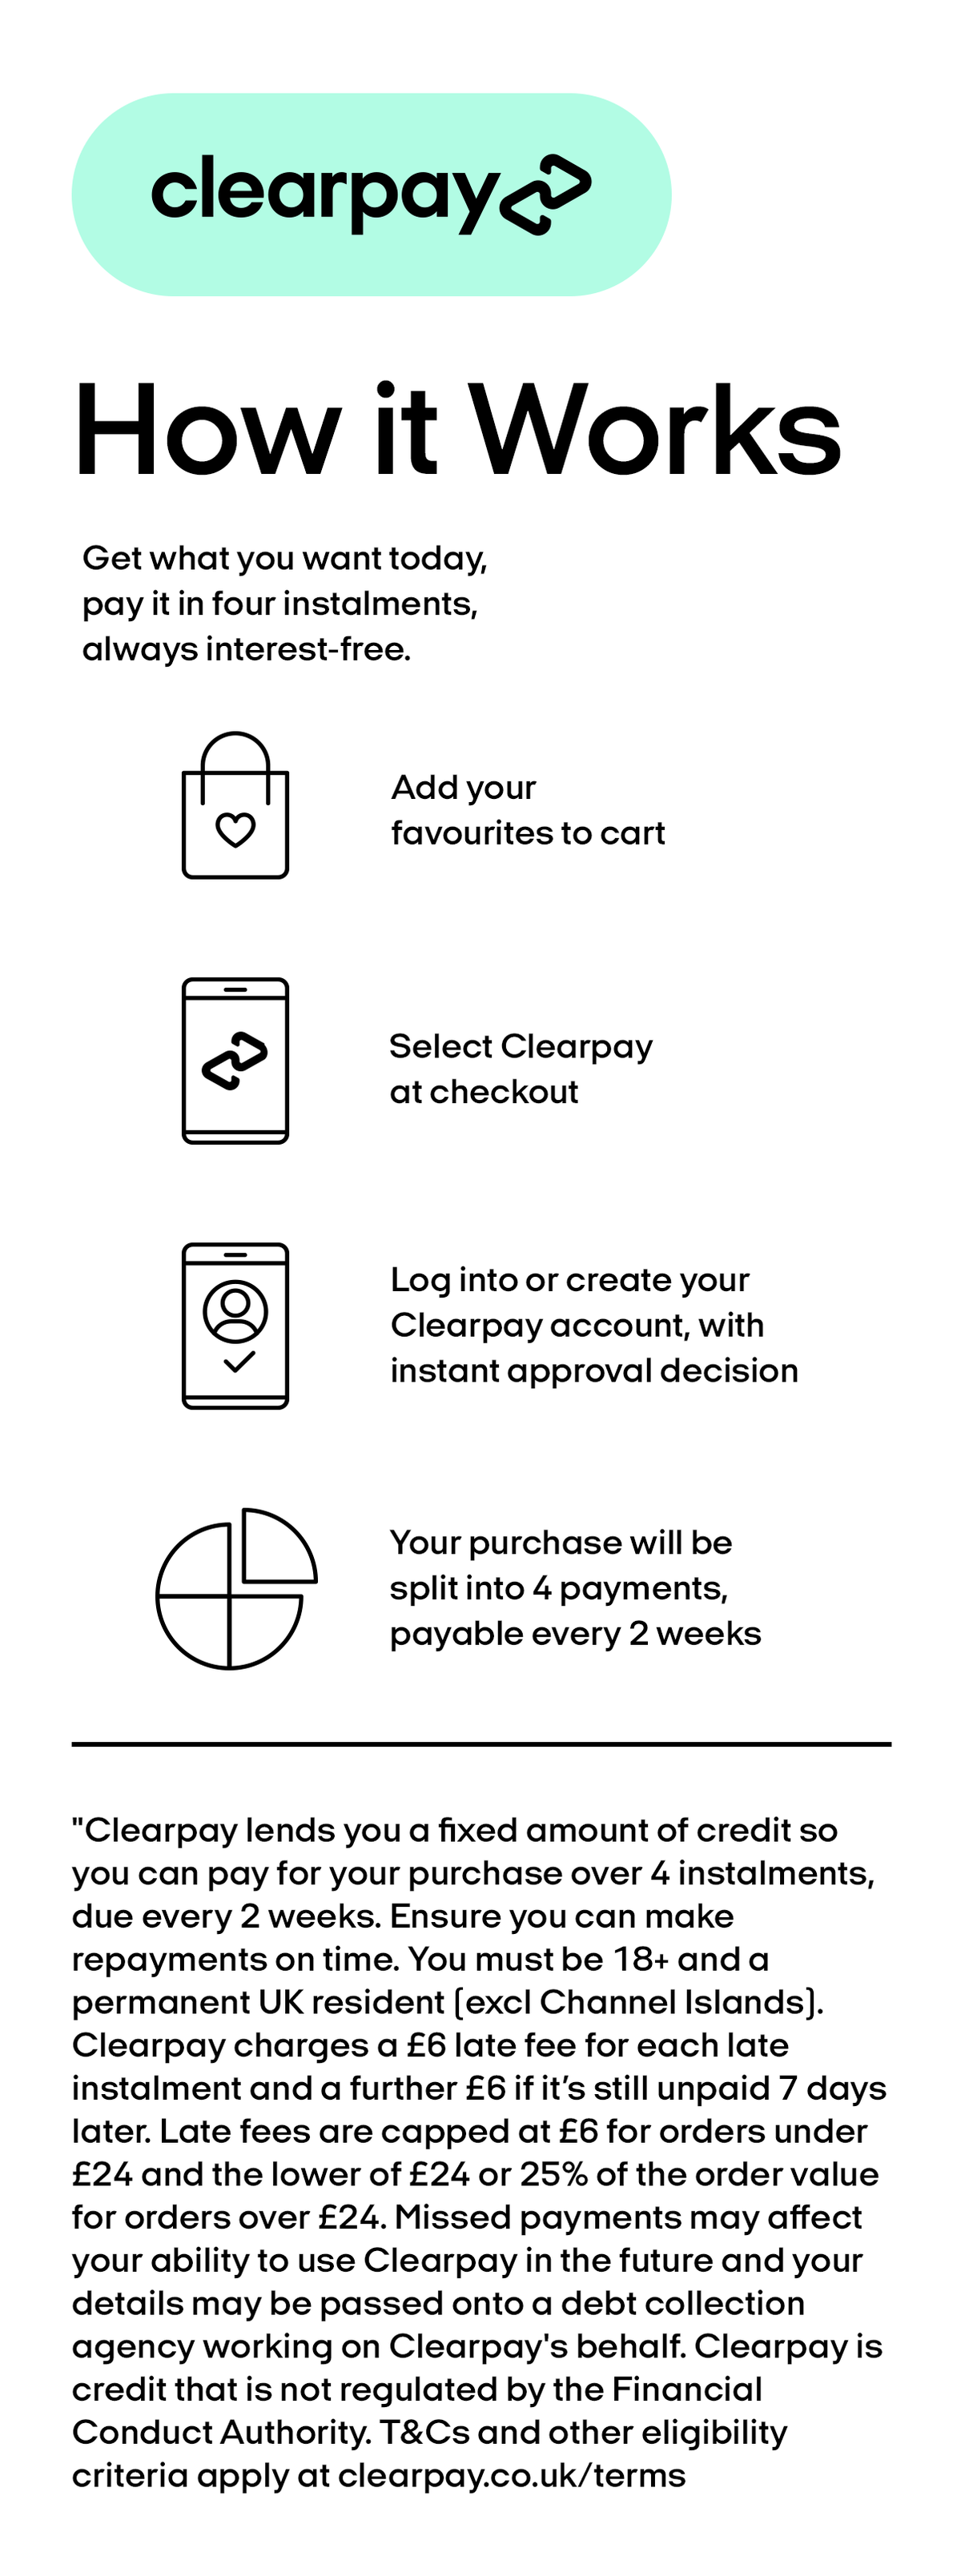 Clearpay enables you to pat for your purchases over four auto instalments, interest free.